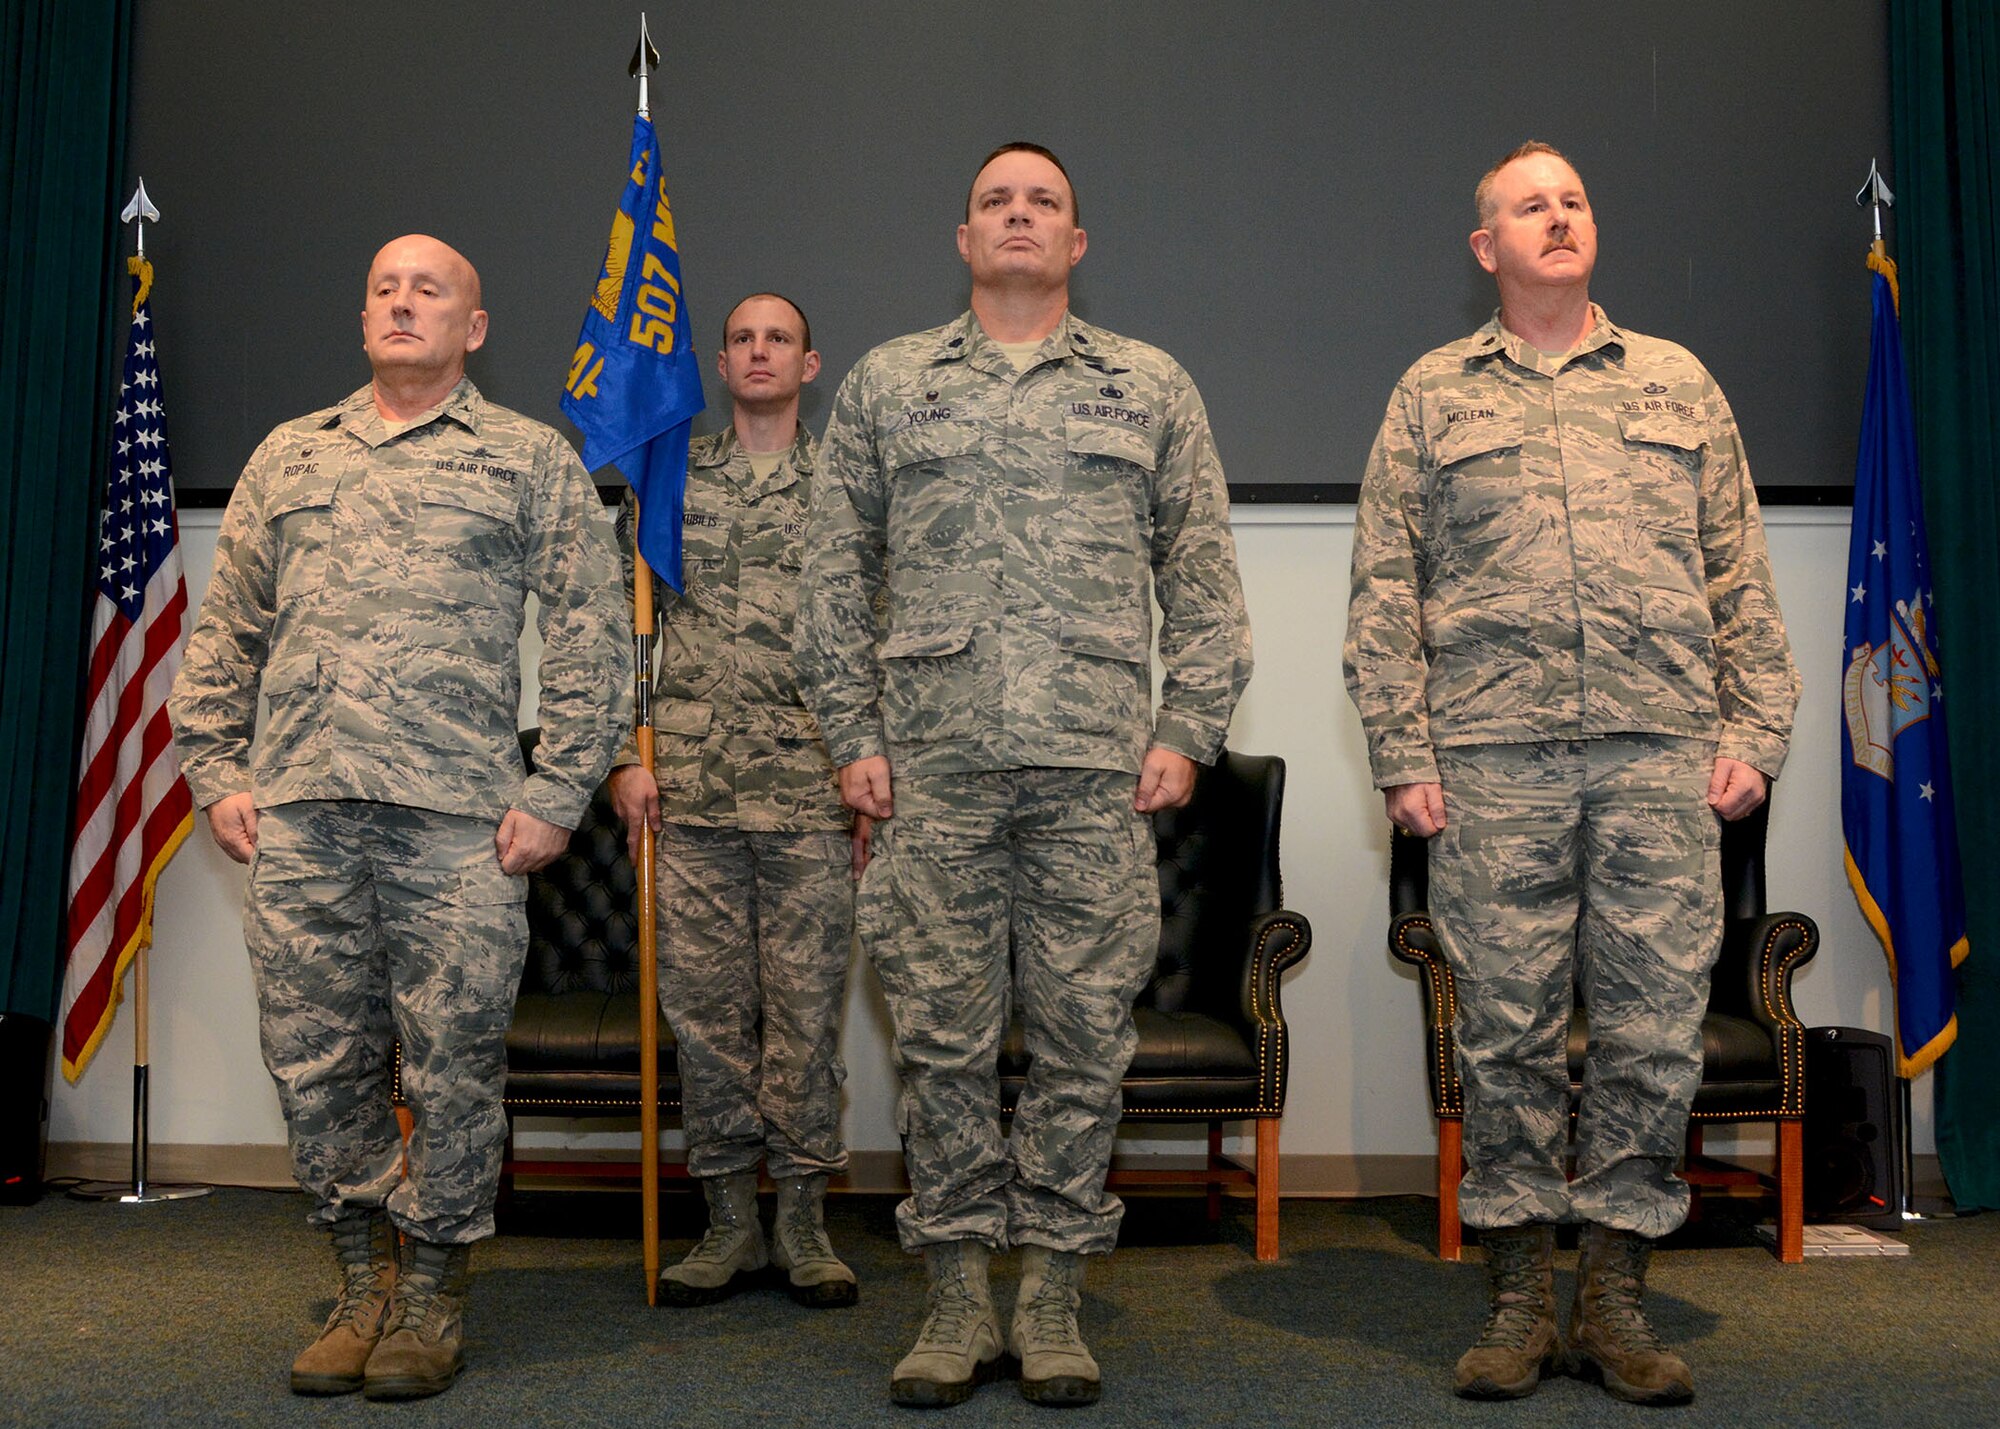 Lt. Col. William Young, center, stands before the 72nd Aerial Port Squadron prior to relinquishing command Feb. 10, 2019, at Tinker Air Force Base, Oklahoma. Col. Richard Ropac, left, 507th Mission Support Group commander, transferred the guidon to new commander, Lt. Col. Darryl McLean, moments later. (U.S. Air Force photo by Tech. Sgt. Samantha Mathison)